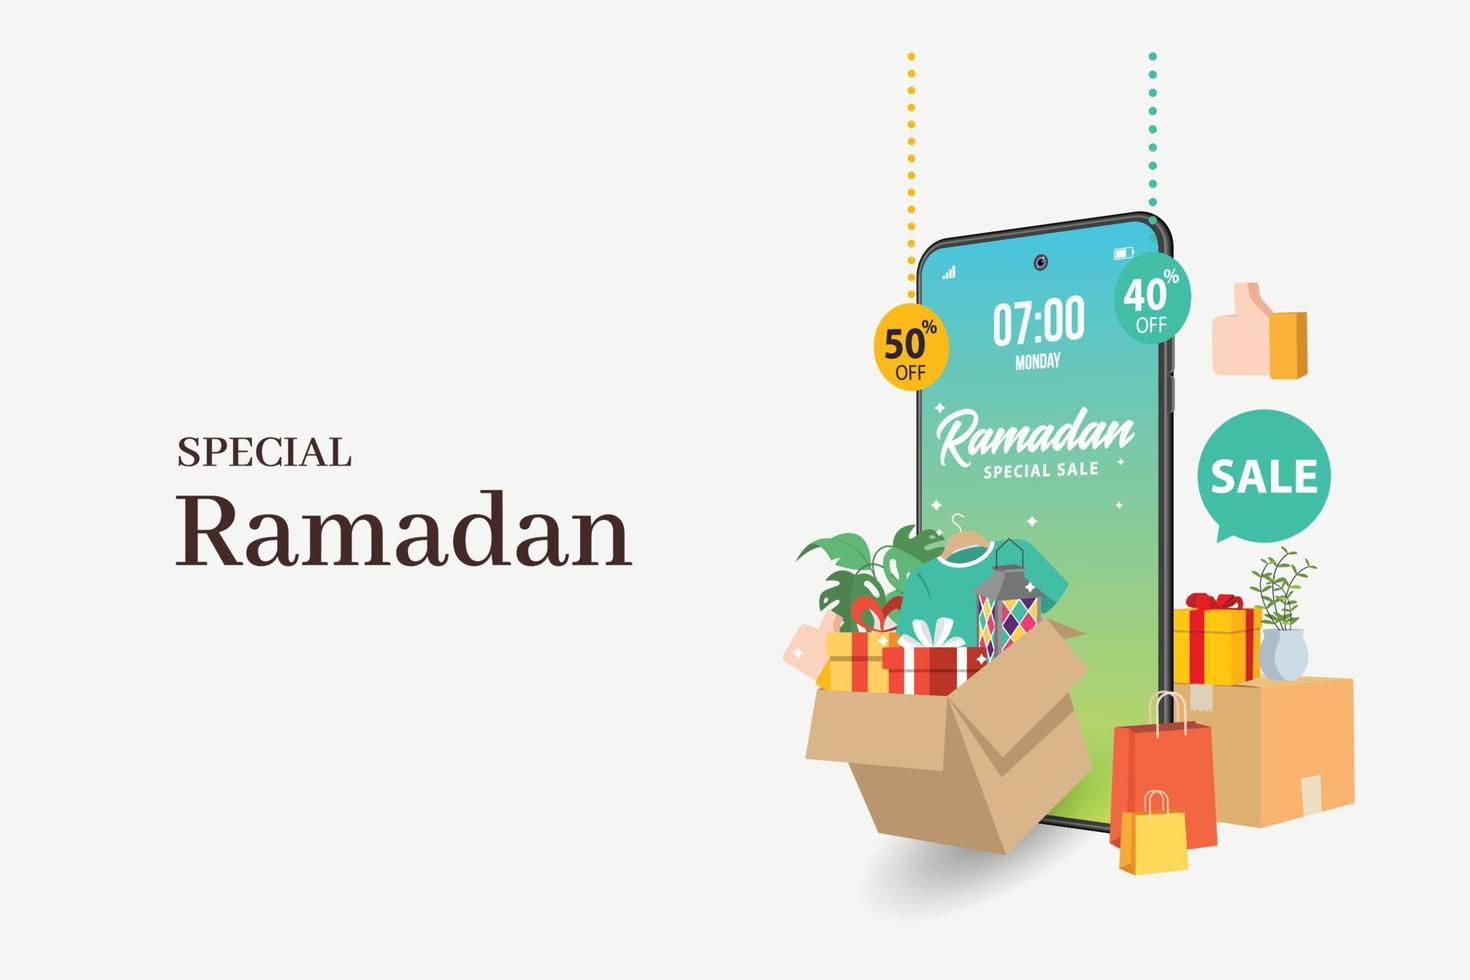 Special Ramadan sale banners set,discount and best offer tag, label or sticker set on occasion of Ramadan Kareem and Eid Mubarak, vector illustration